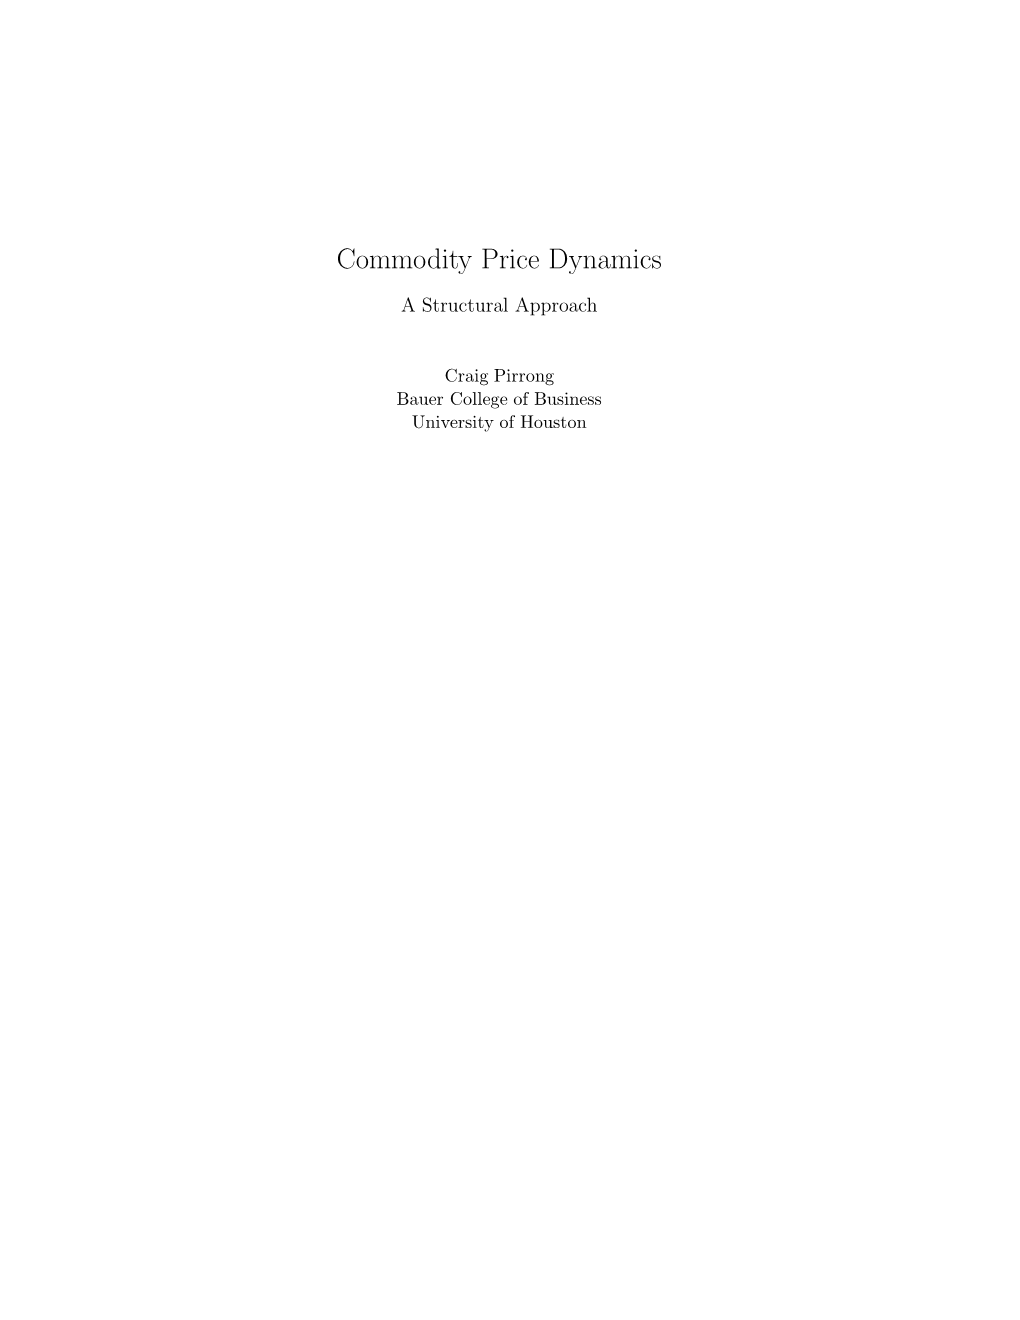 Commodity Price Dynamics a Structural Approach